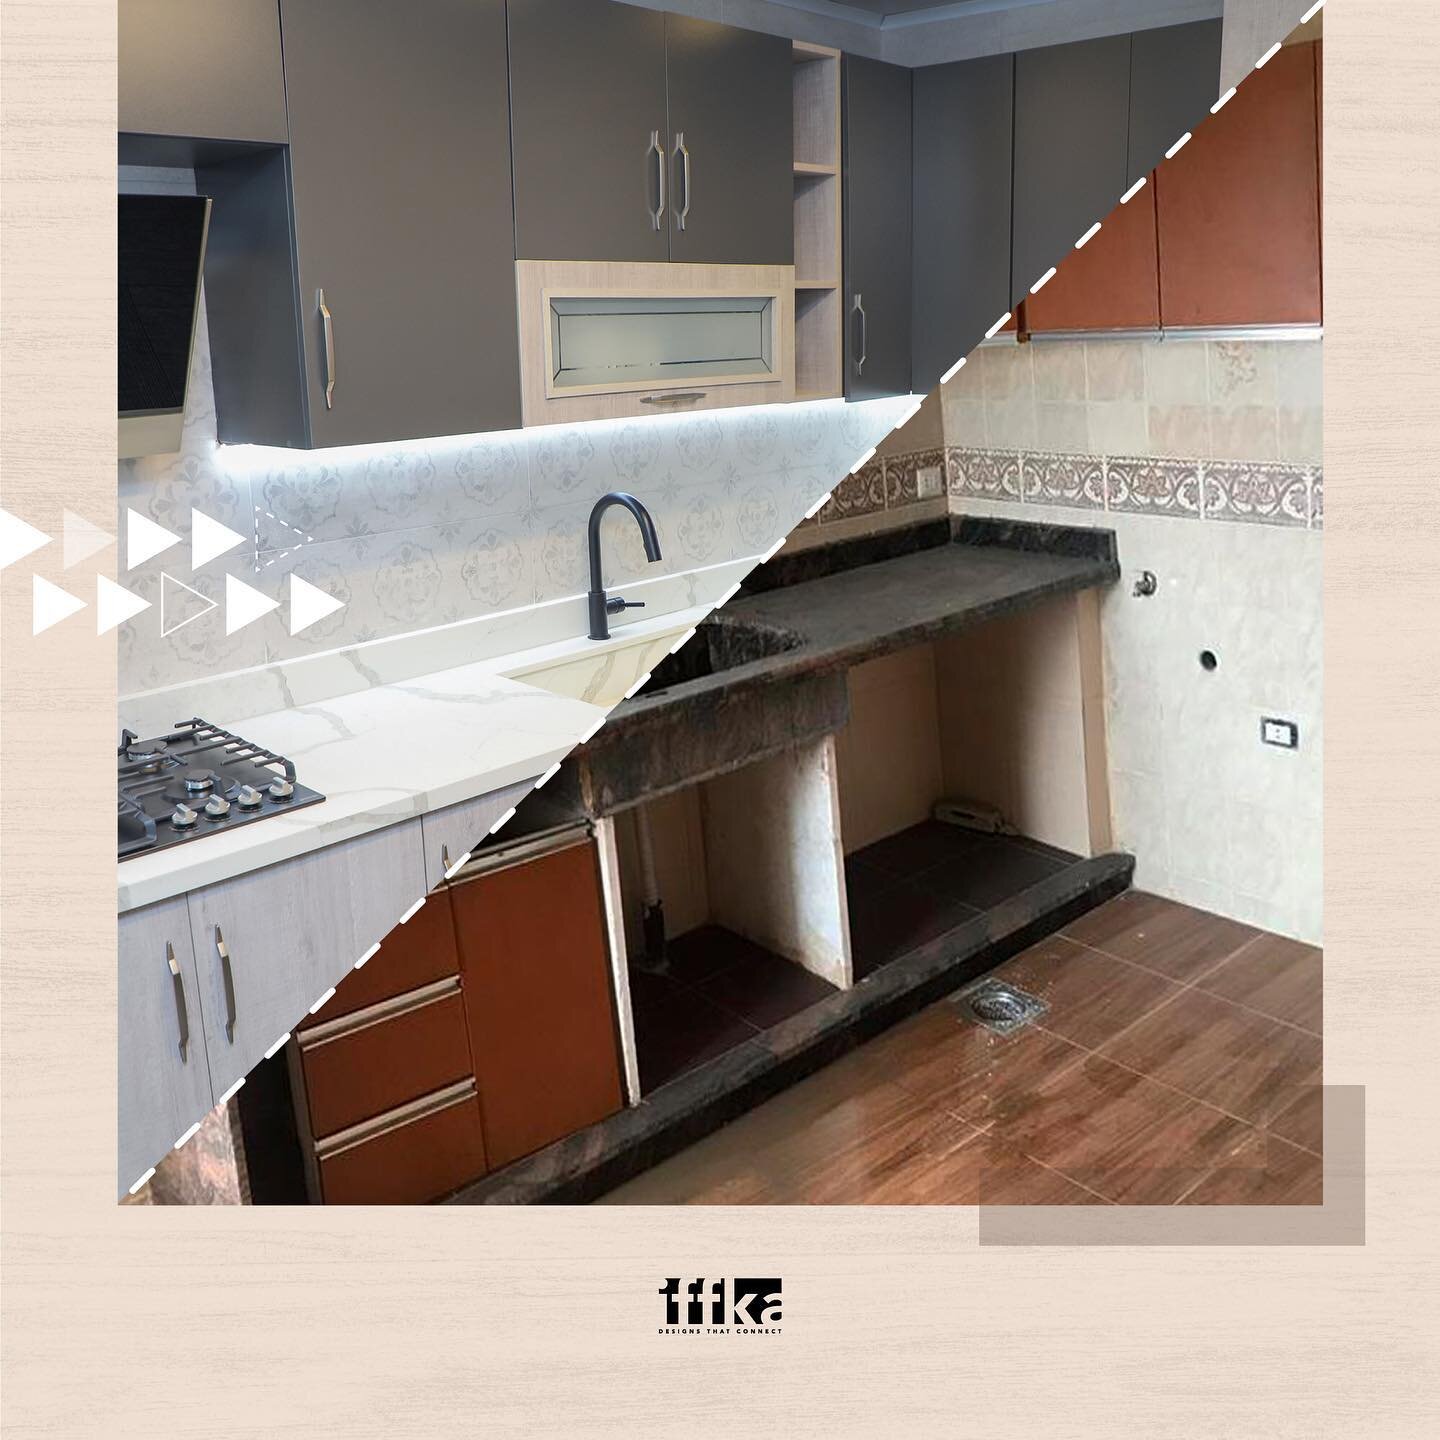 We get excited every time we have a renovation project, due to the joy it gives, we consider every single accomplishment a Success Story.

IFFKA, Our success, your happiness!

.في كل مشروع إعادة تصميم، نعتبر سعادة العميل قصة نجاح مستمرة

إيفكا، نجاحن